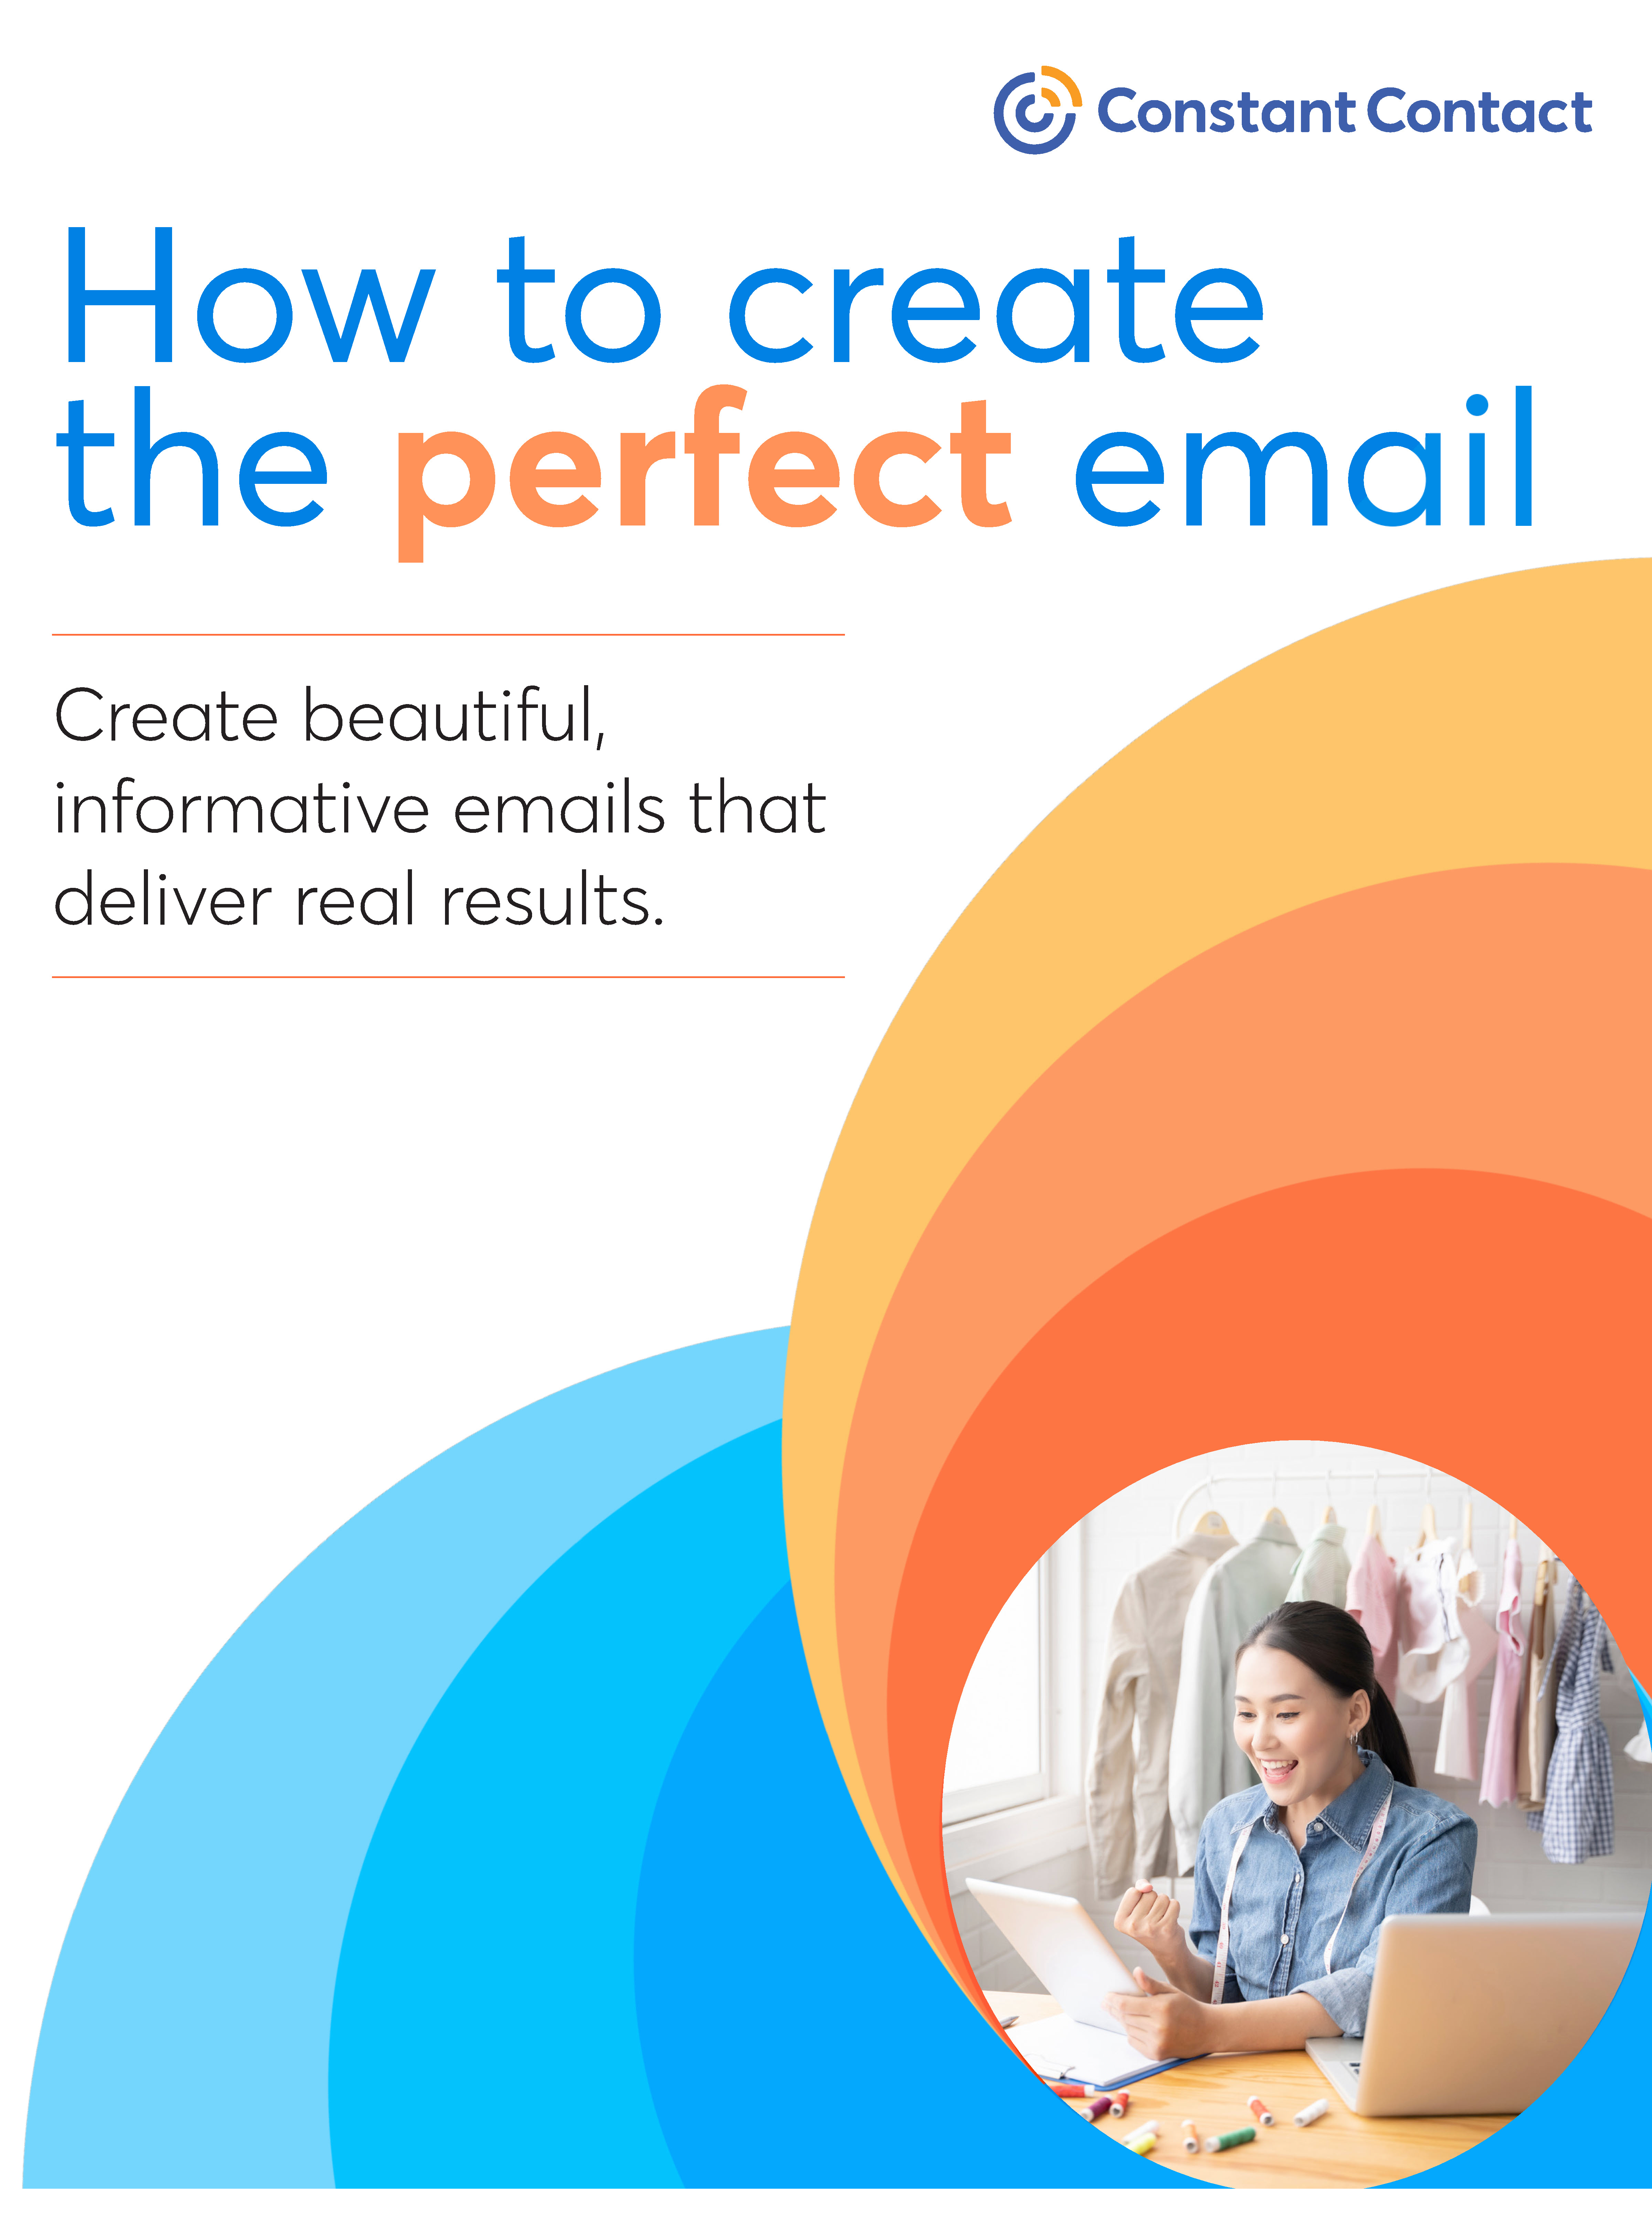 How to Create The Perfect Email downloadable guide from Constant Contact